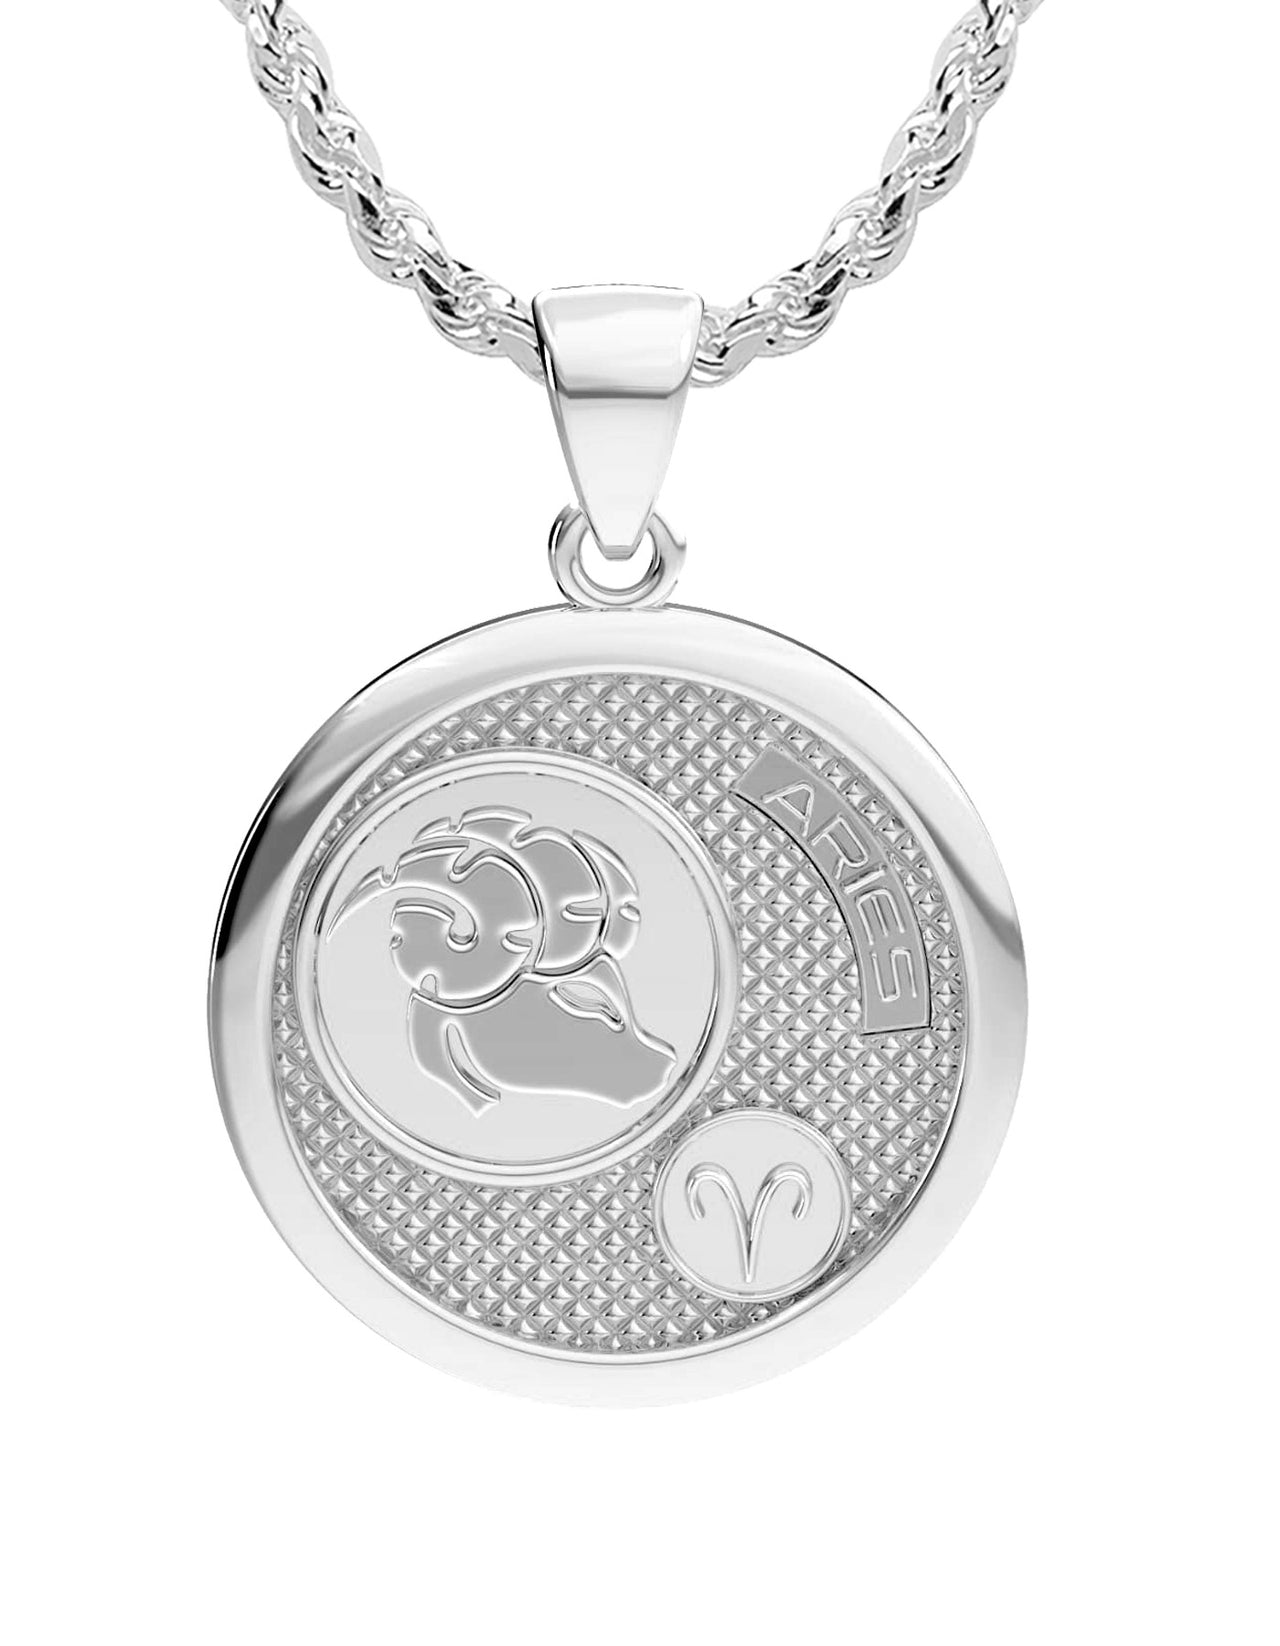 Ladies 925 Sterling Silver Round Aries Zodiac Polished Finish Pendant Necklace, 25mm